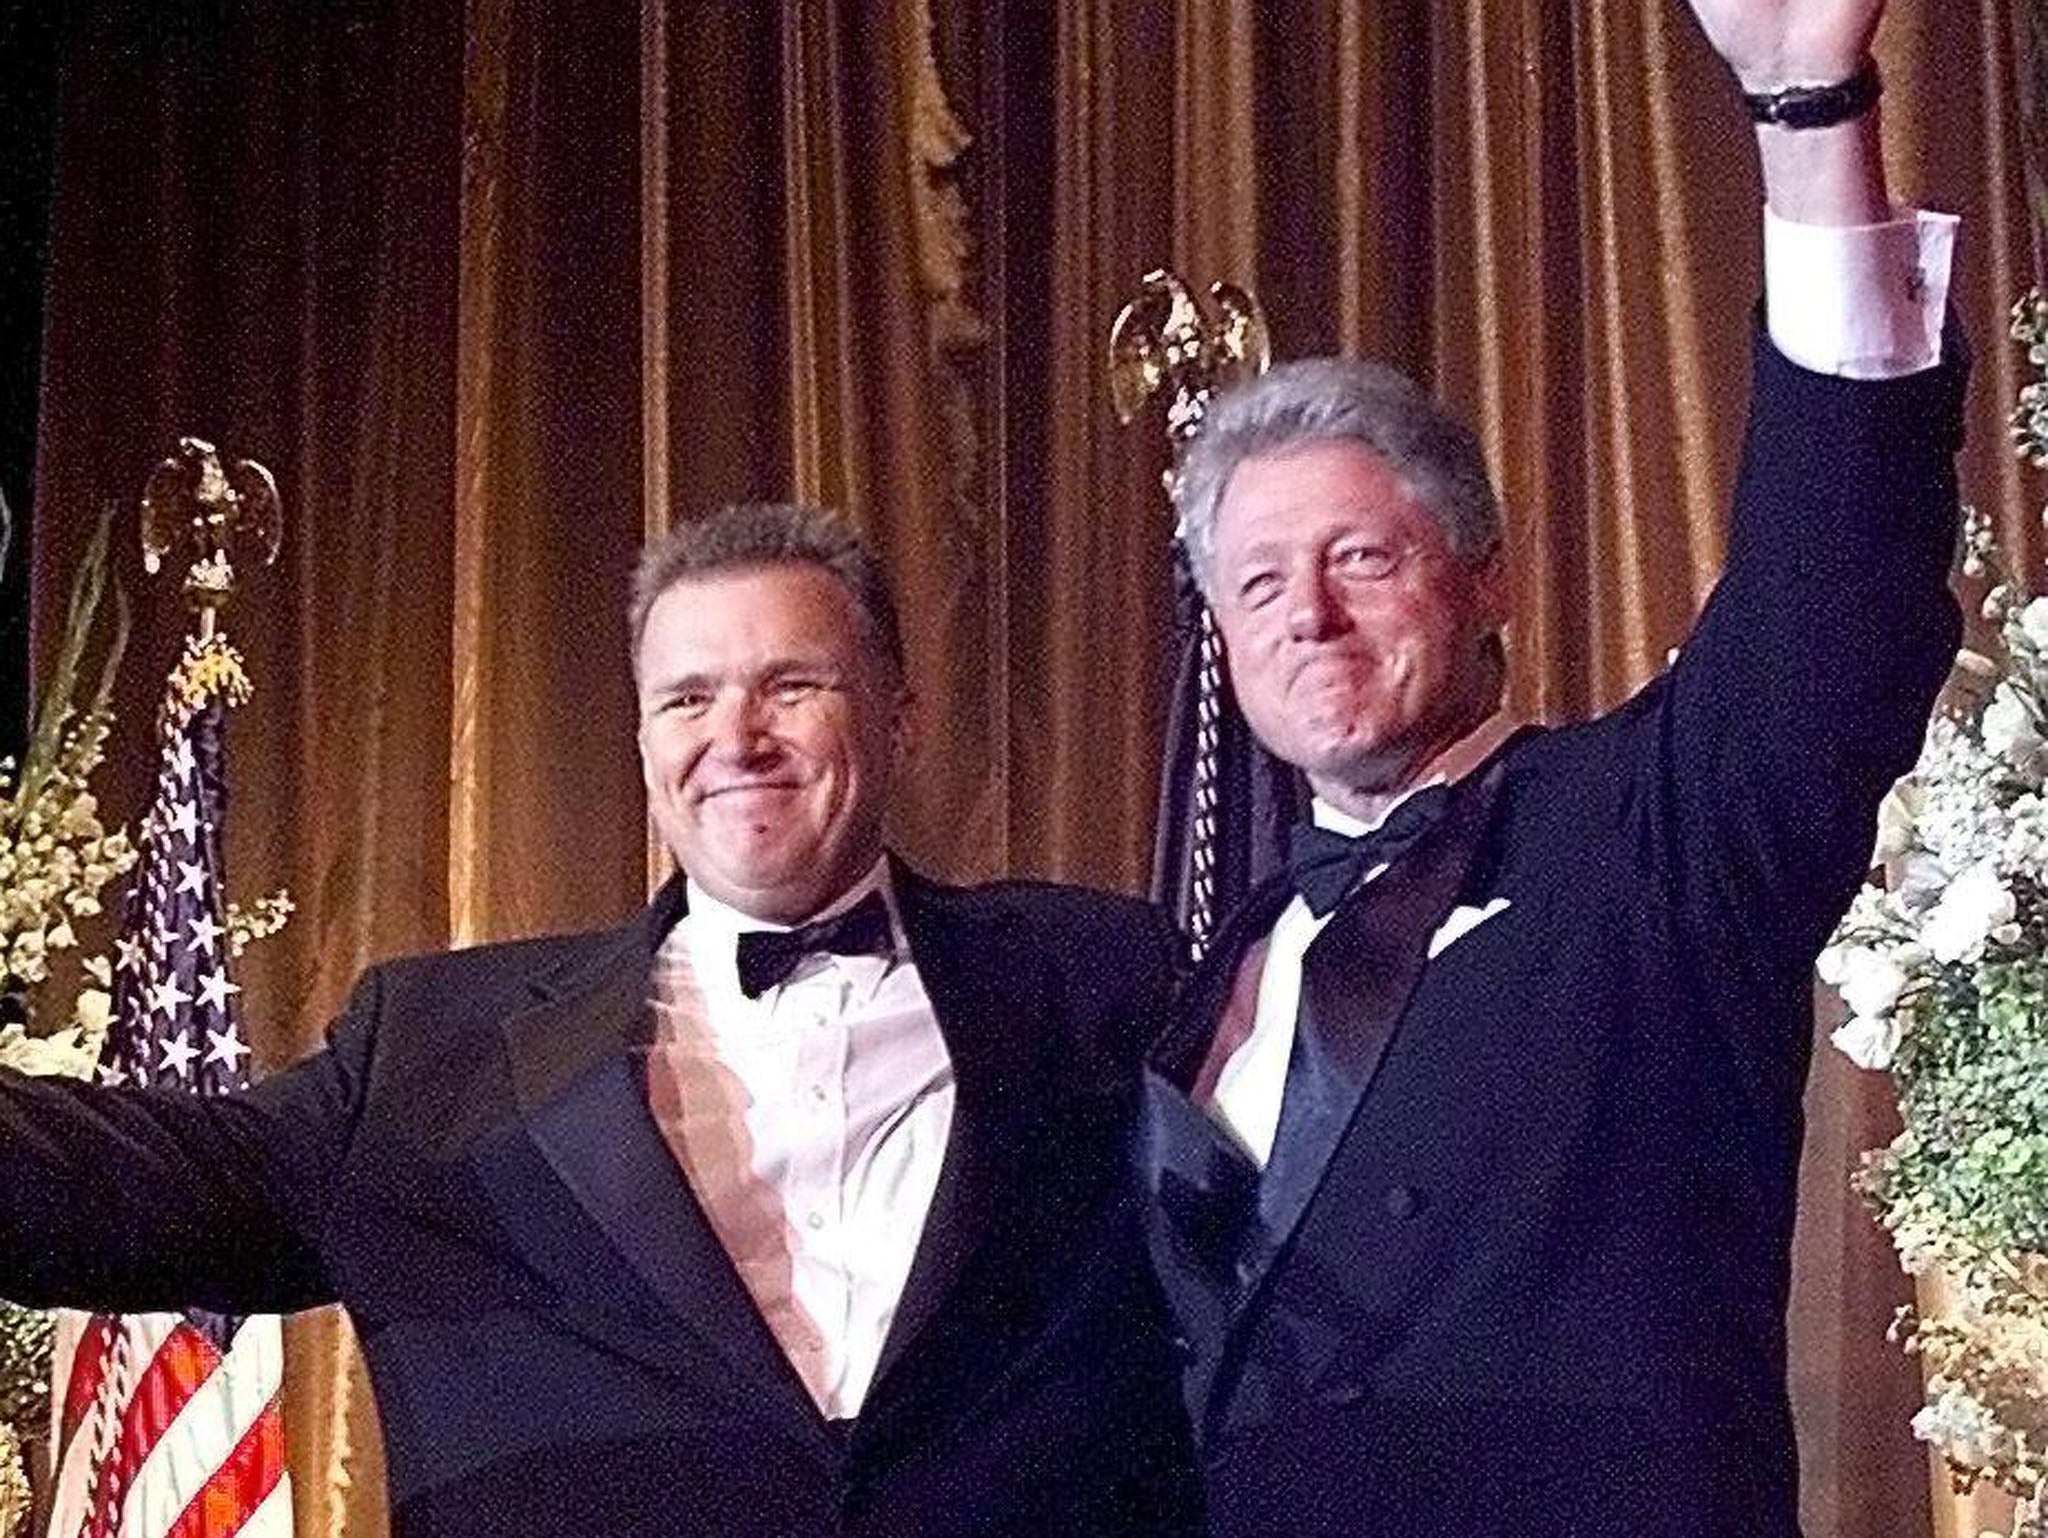 David Mixner and Bill Clinton at an Access Now for Gay and Lesbian Equality dinner in 1999